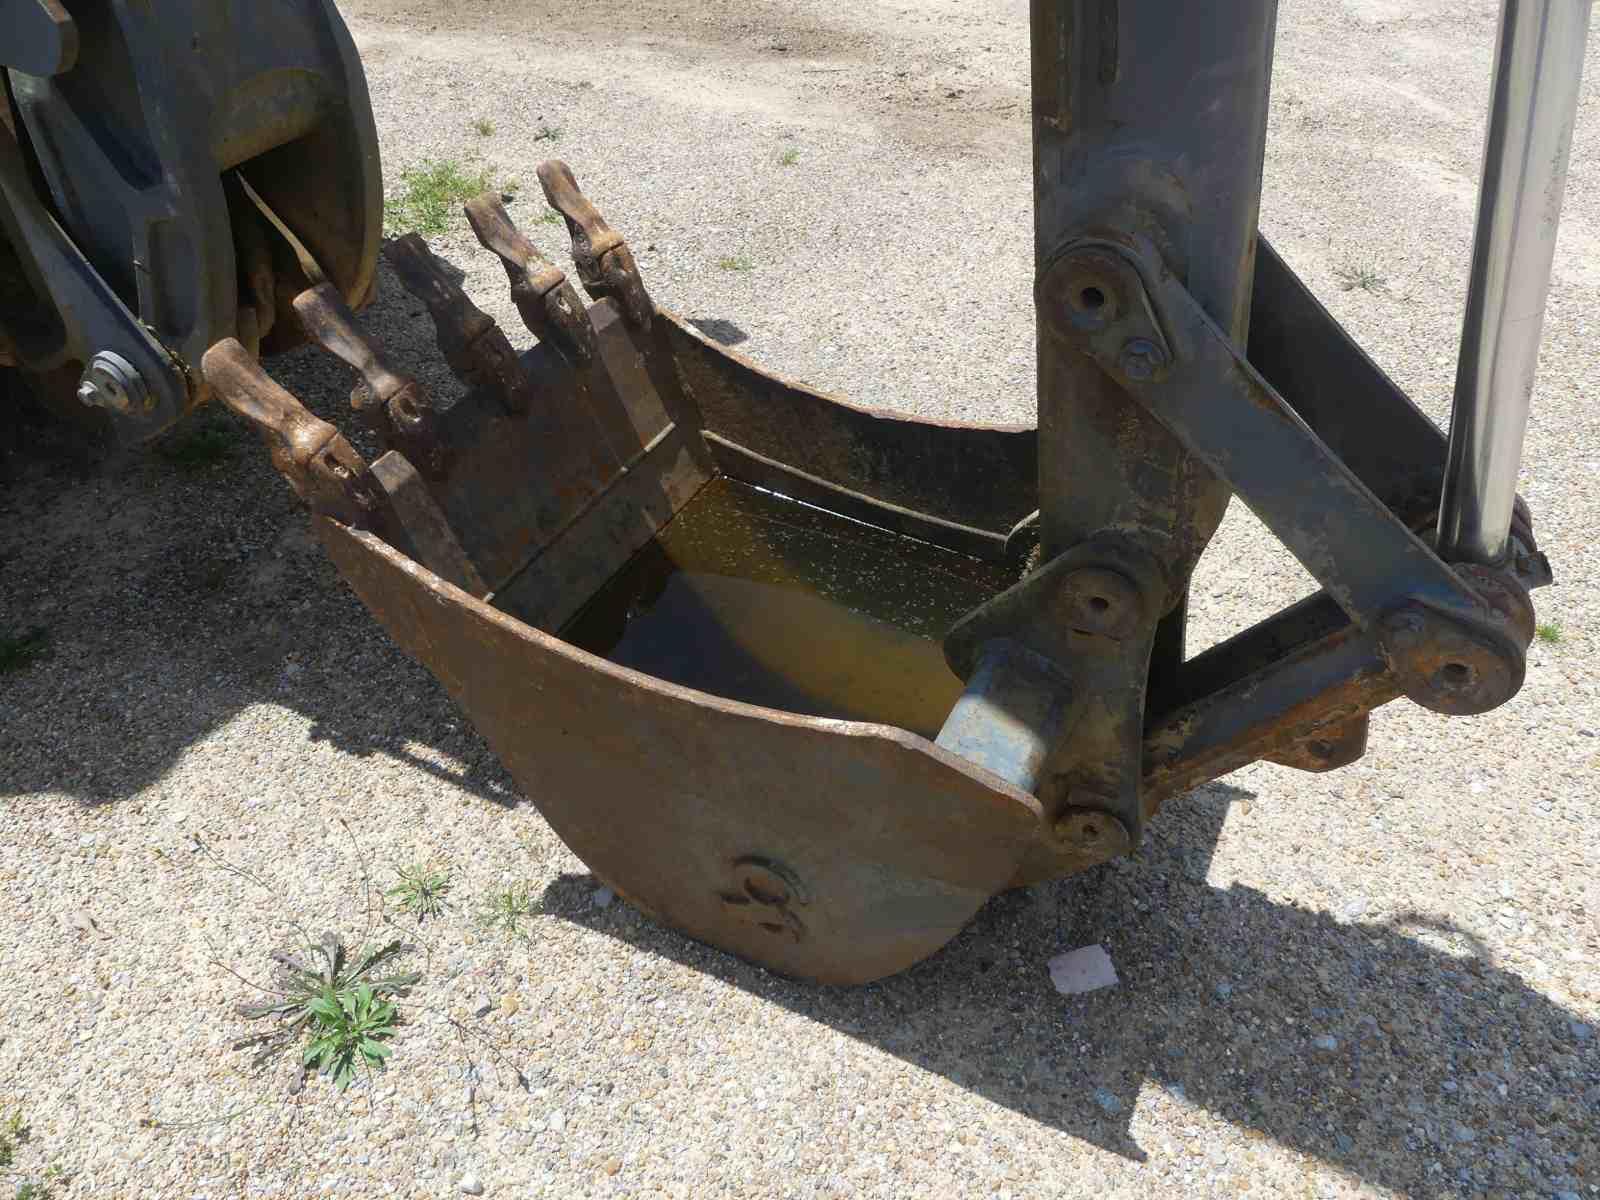 Volvo BL60 4WD Extendahoe, s/n BL60D10503: Canopy, Meter Shows 1889 hrs